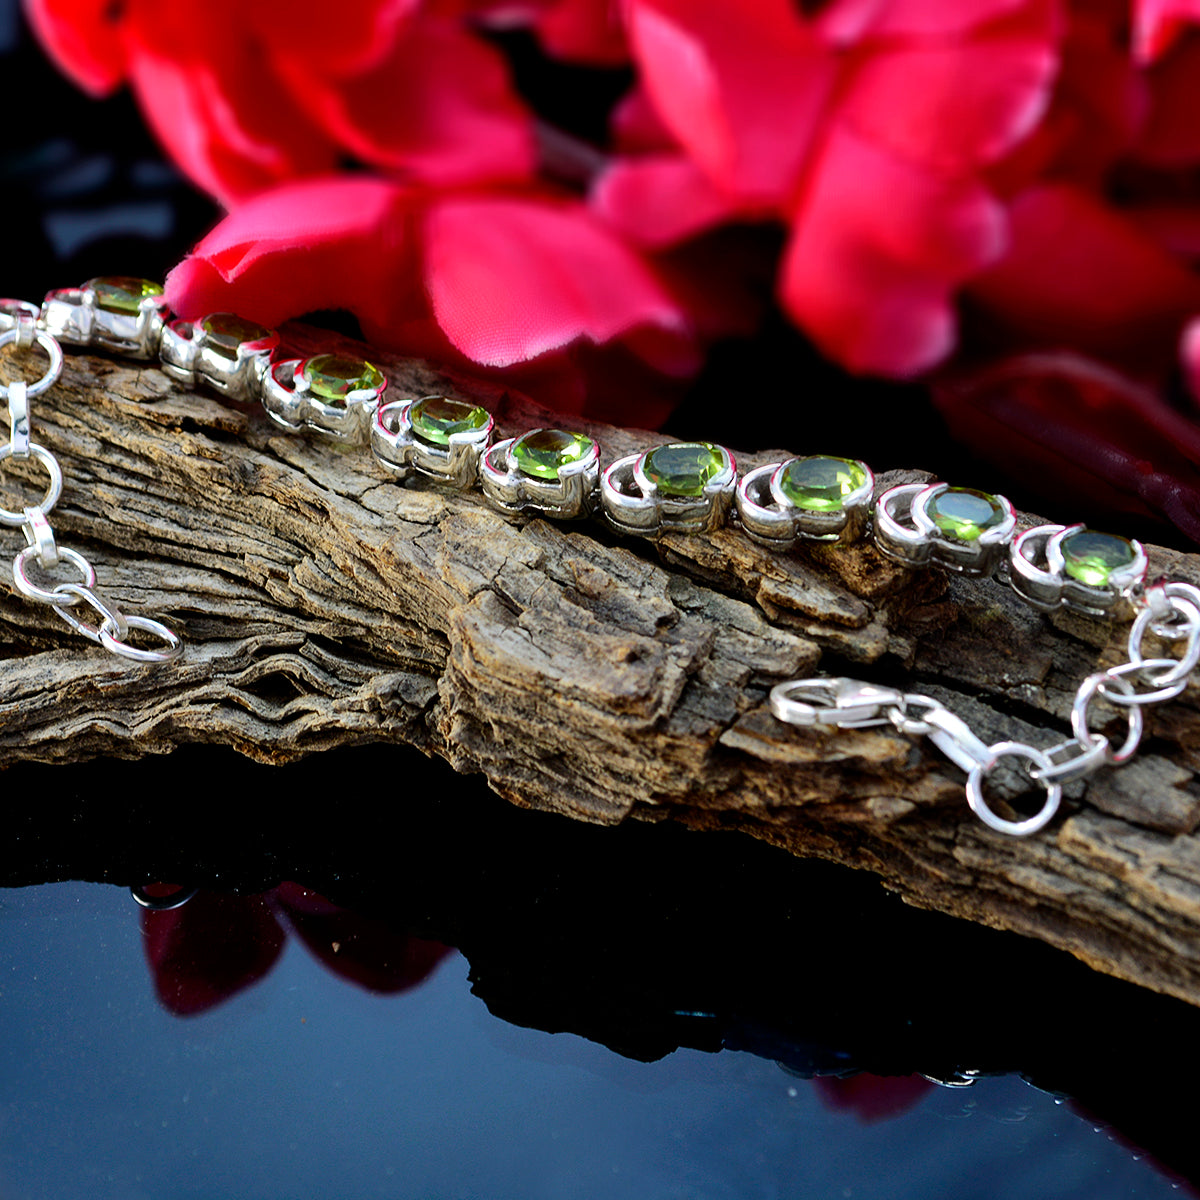 Riyo Good Gemstones Oval Faceted Green Peridot Silver Bracelets gift for christmas